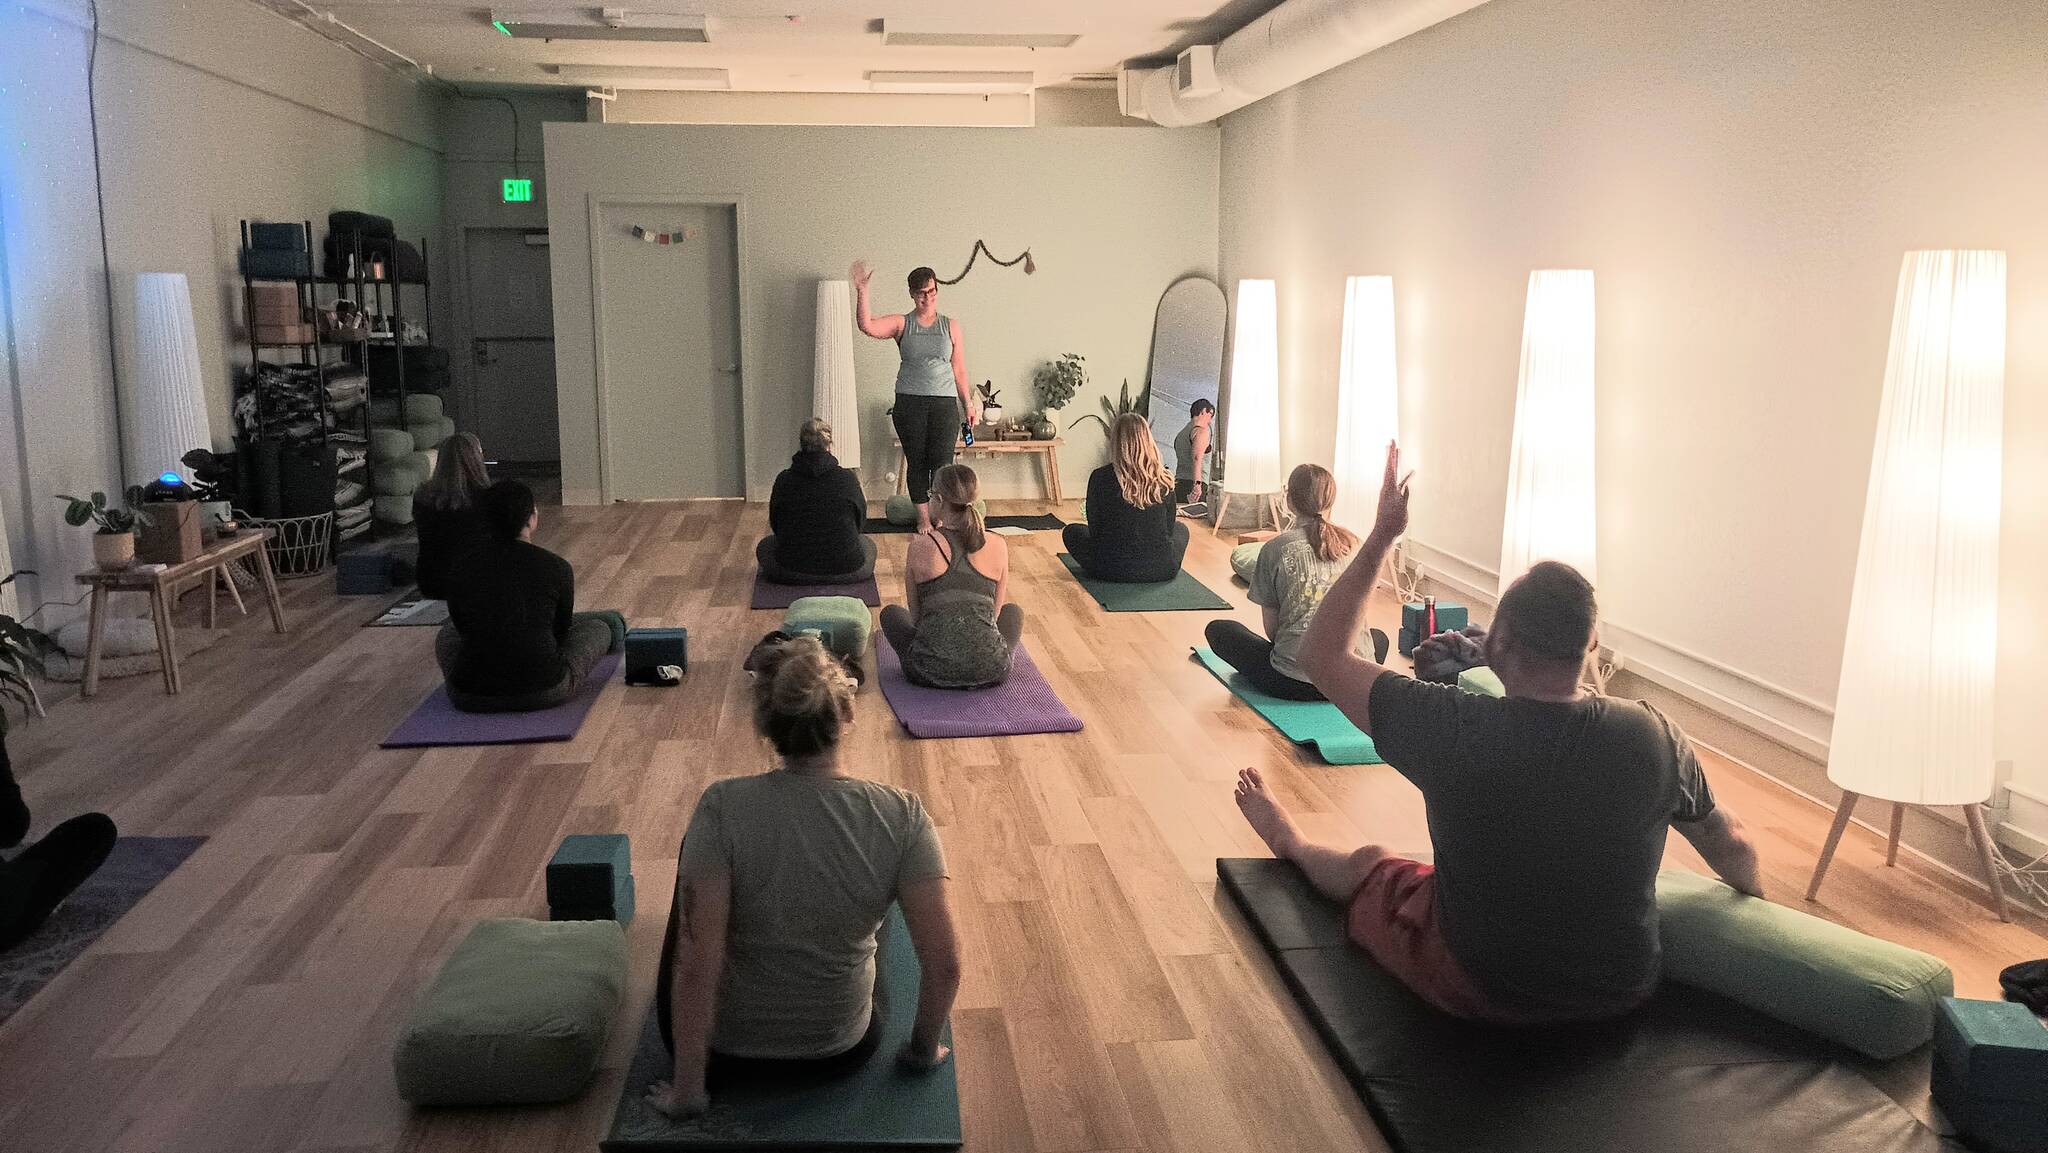 Shortly after the ribbon cutting, a yoga class began at Crown Yoga. Photo by Bailey Jo Josie/Sound Publishing